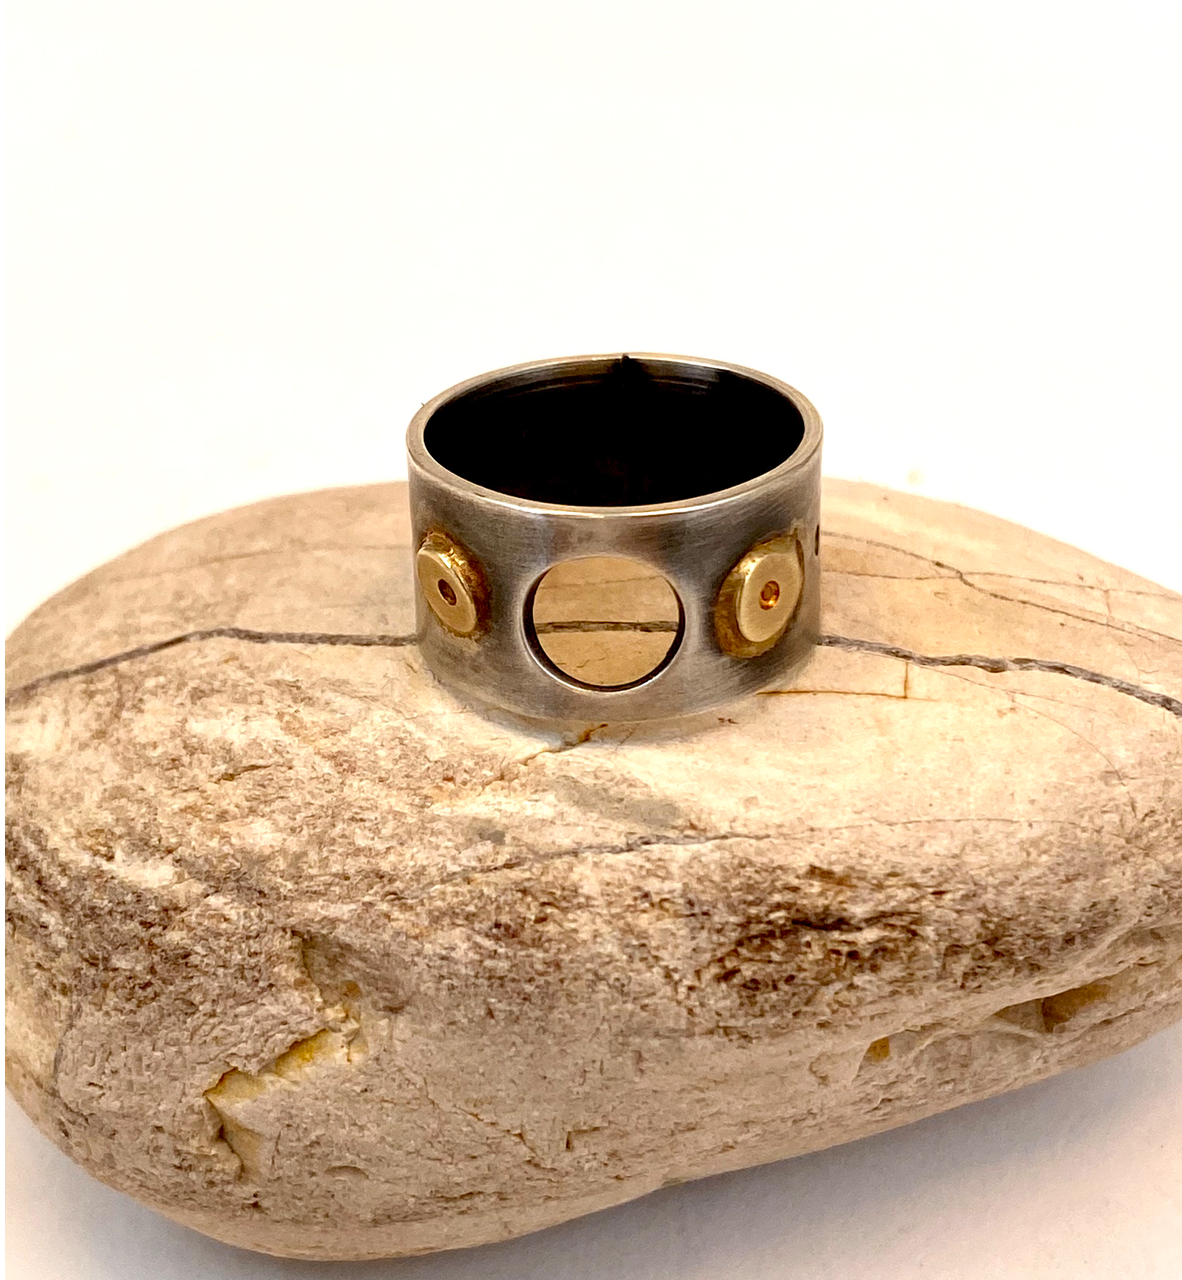 This unique sterling silver band is adorned with round 14k gold embellishments, a circle opening, and a pattern of small circles around the circumference. 